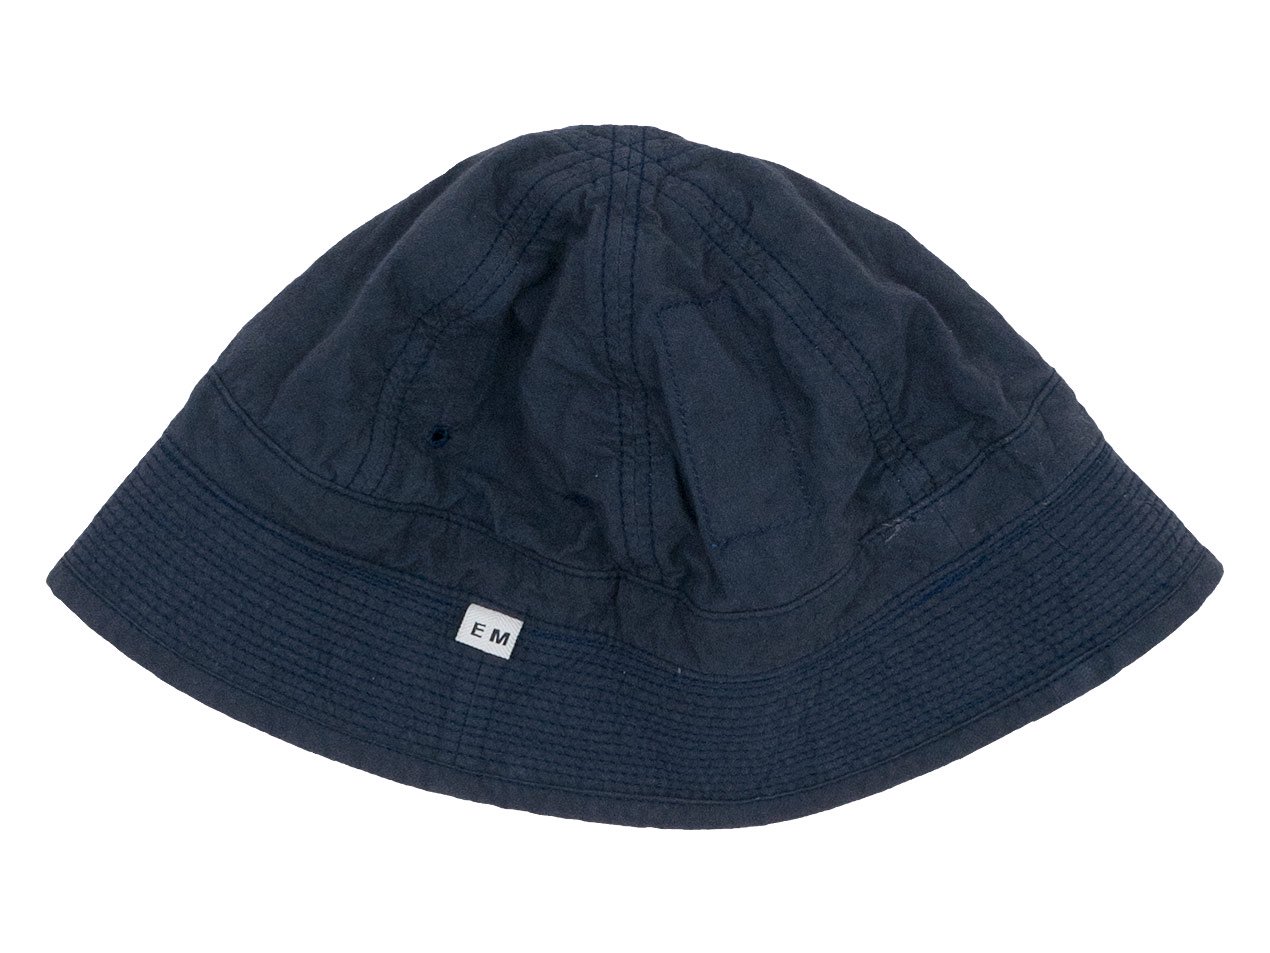 ENDS AND MEANS Army Hat | hartwellspremium.com